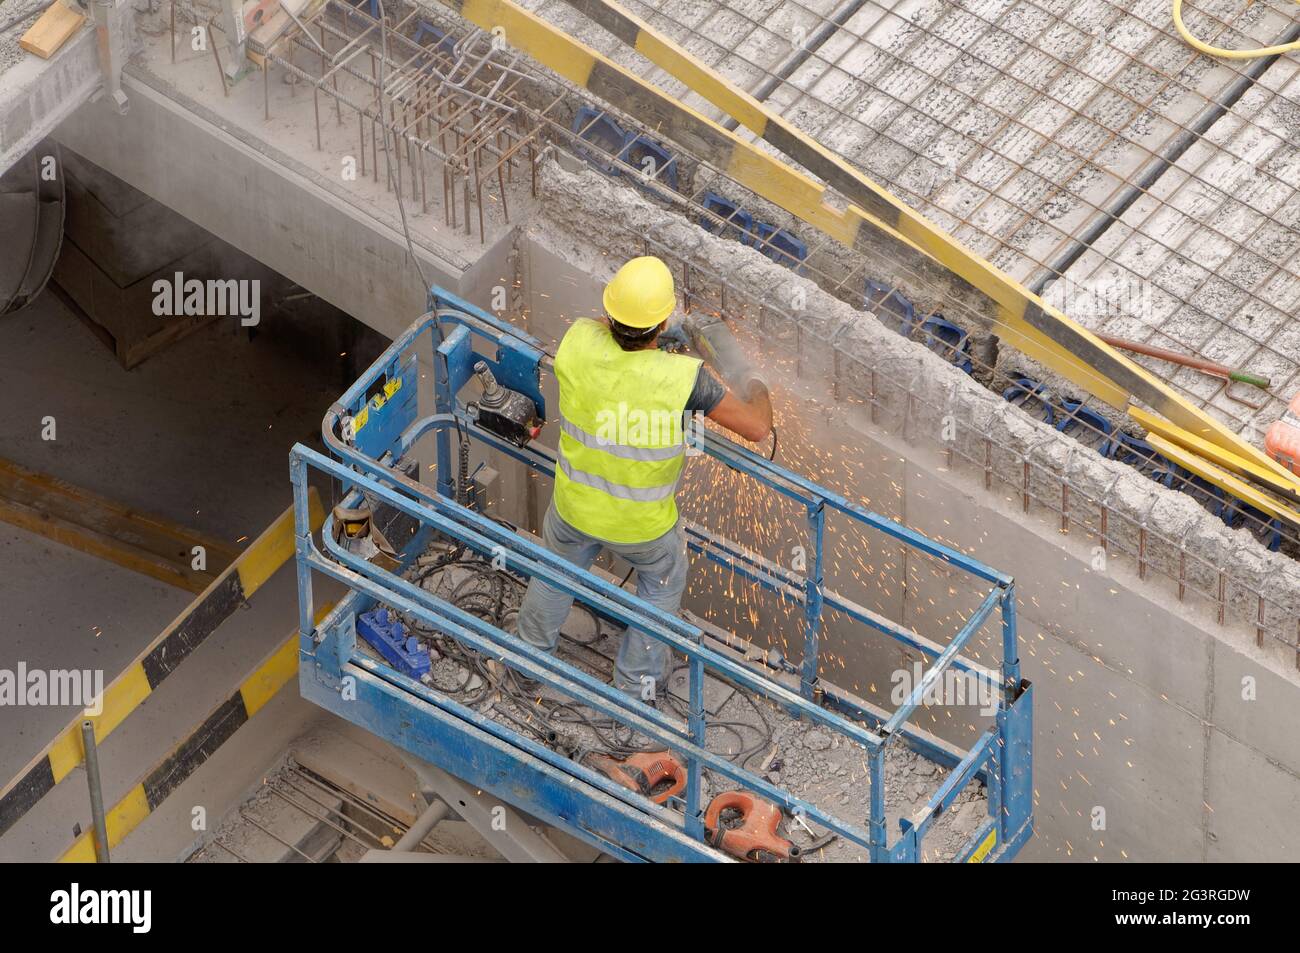 Worker on lift using a grinder on a construction site (building) protected by a helmet Stock Photo